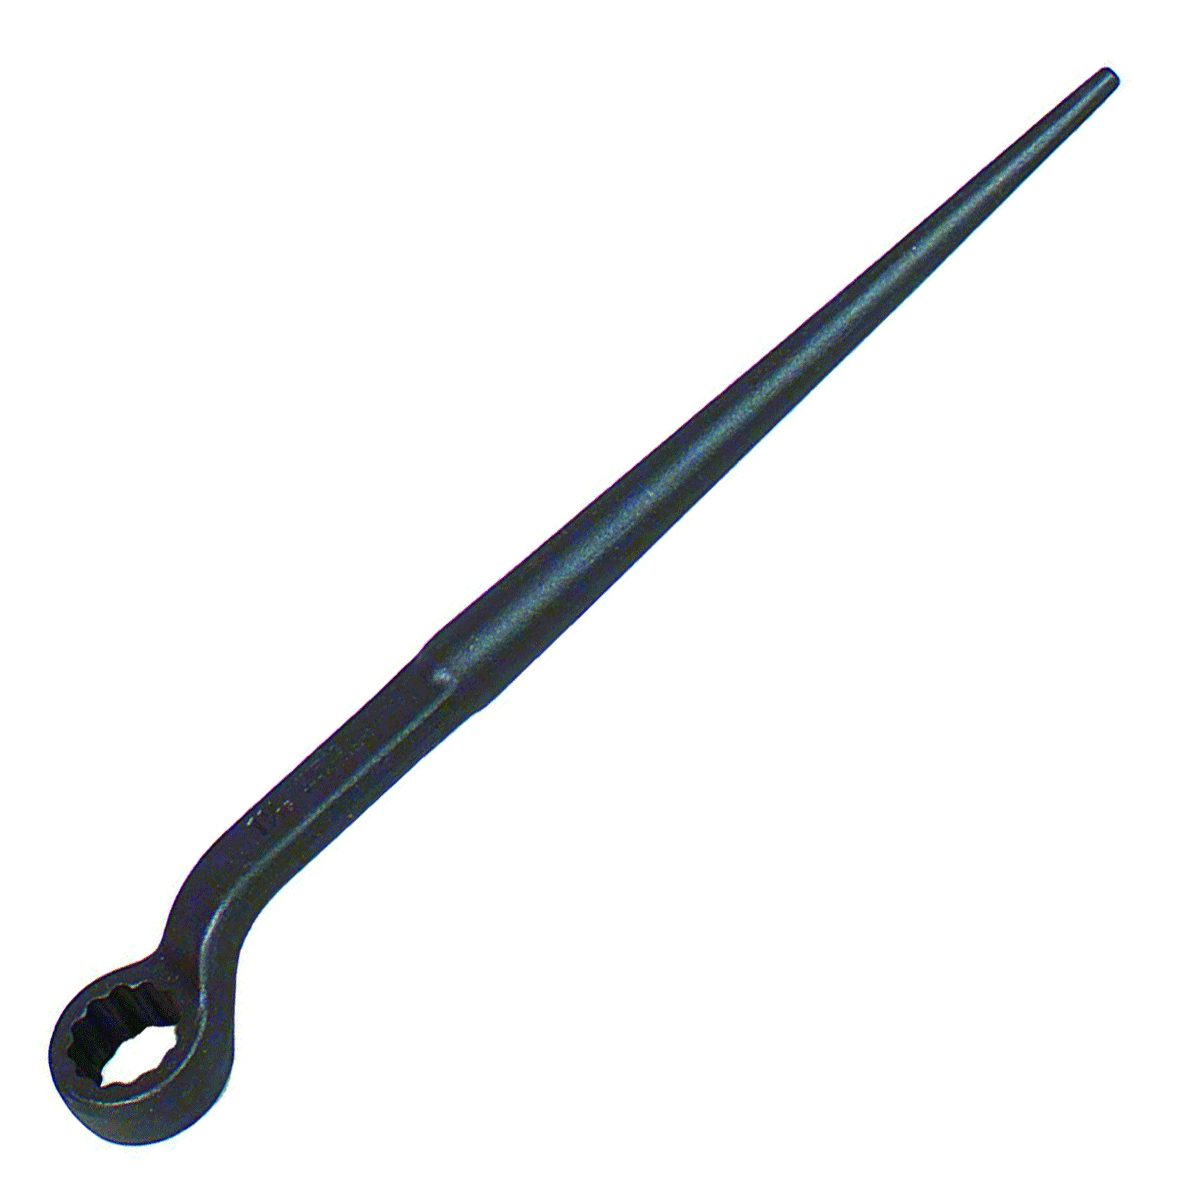 Wright 1" Spud Handle Box Wrench 12 Pt. #1762 (1762WR)